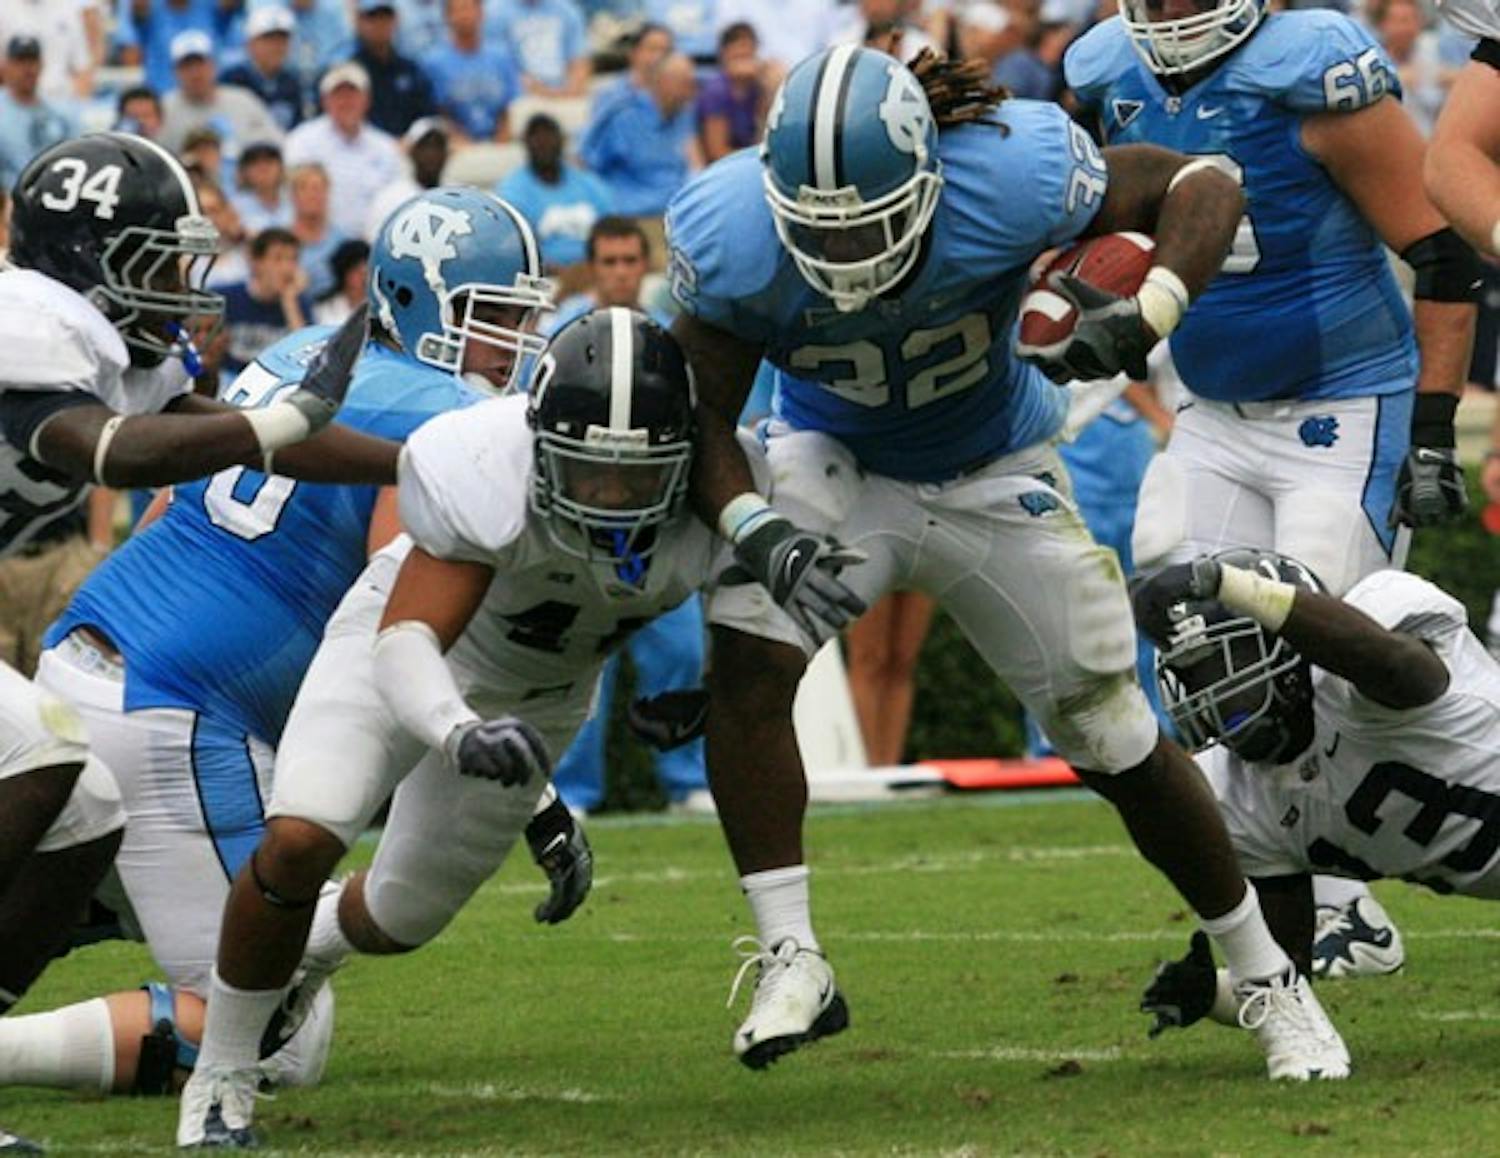 Running back Ryan Houston scored three touchdowns in the 42-12 win over Georgia Southern Saturday. DTH/Andrew Dye